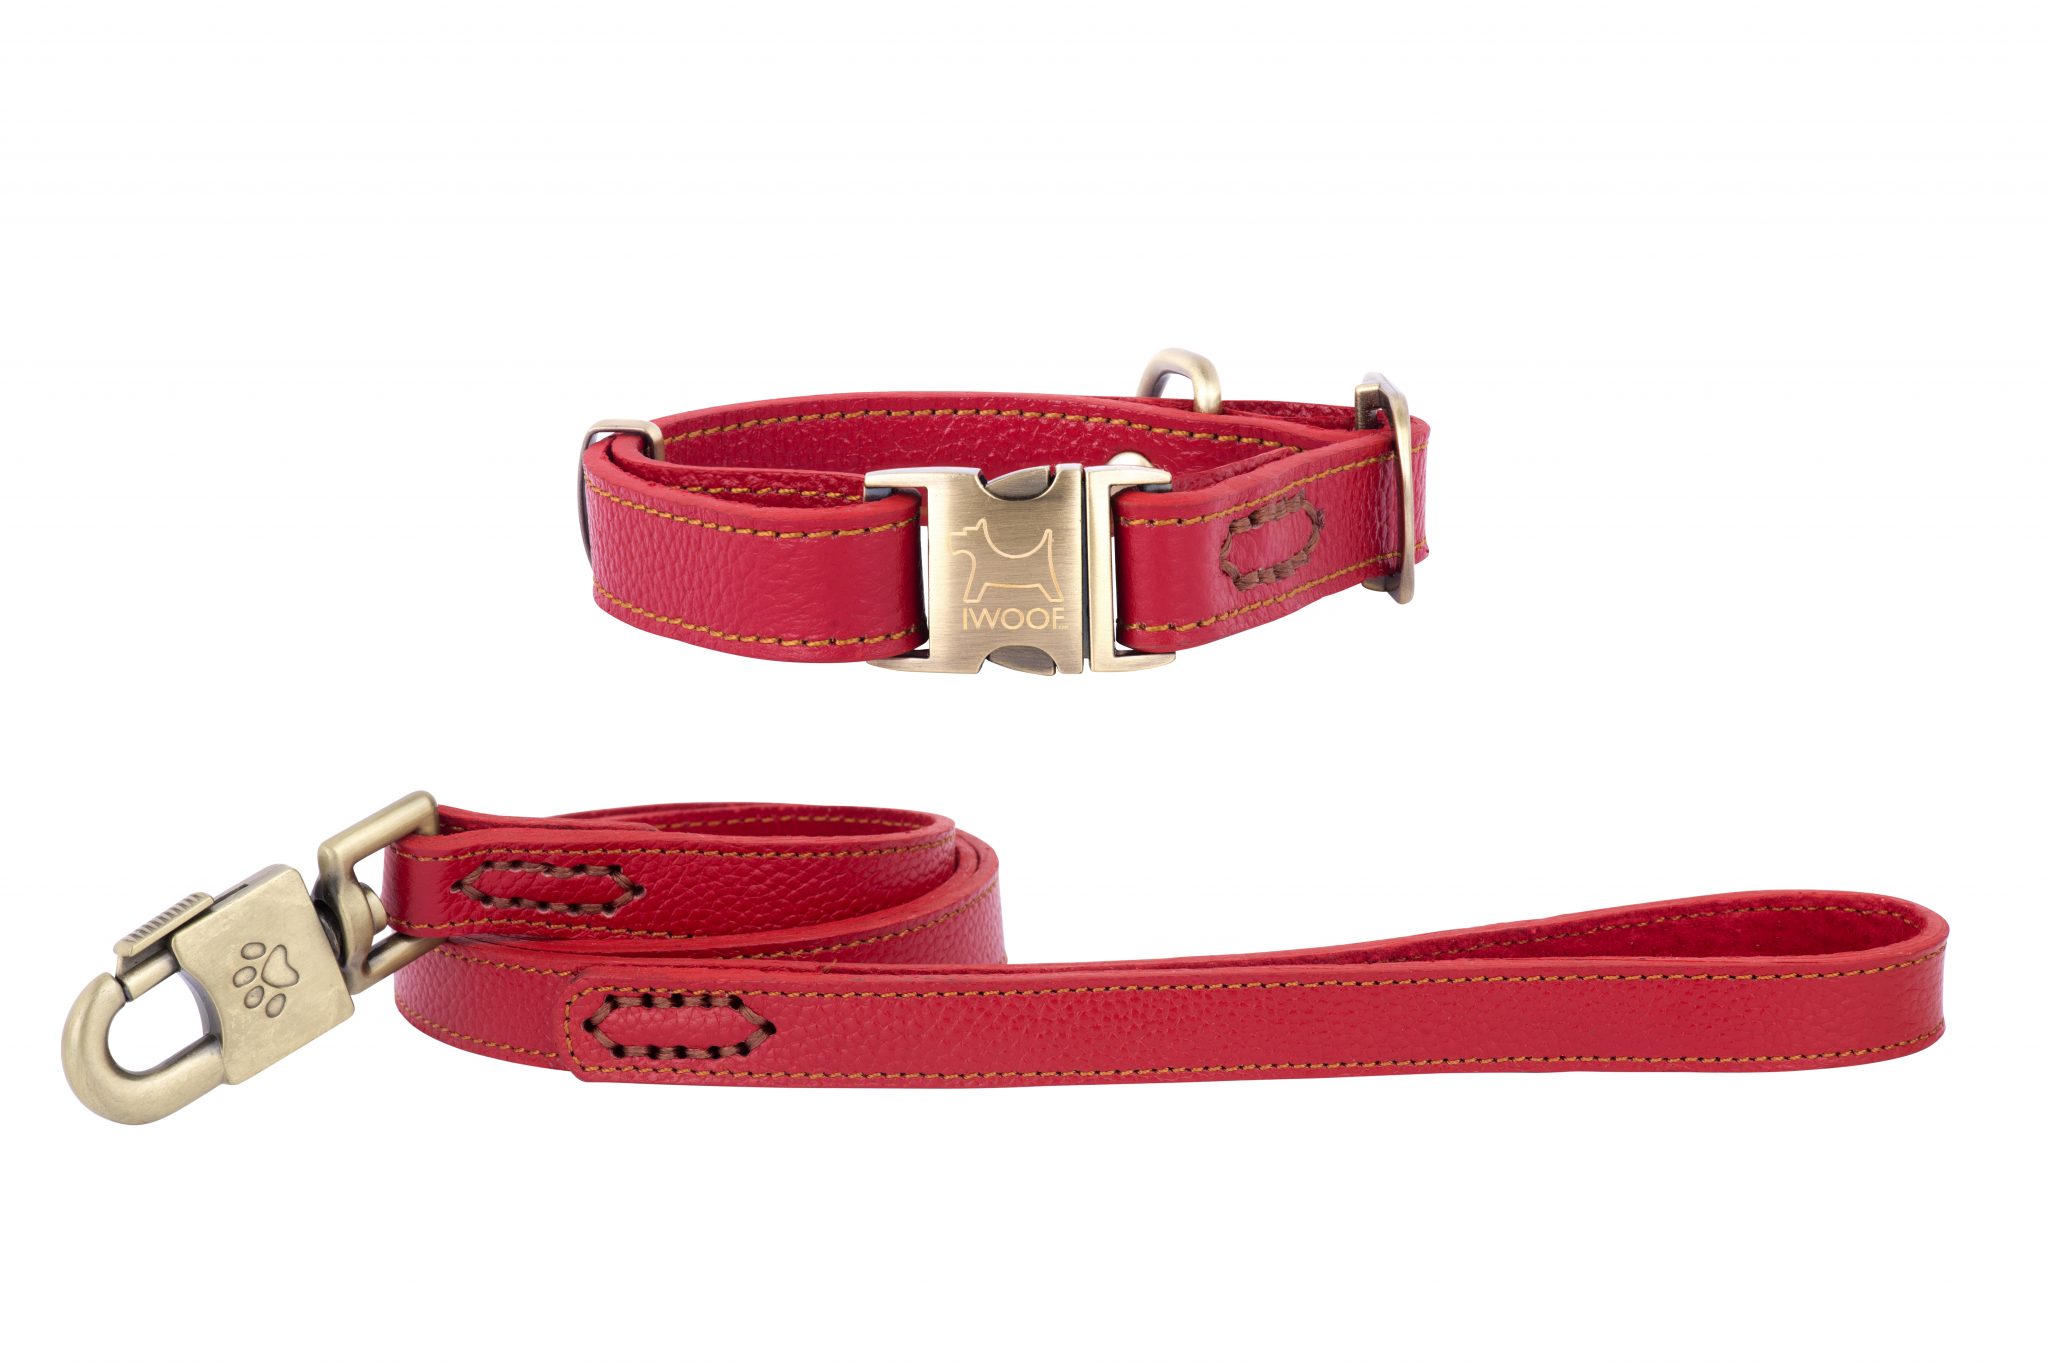 POLZEATH leather designer dog collar and lead by IWOOF in Red